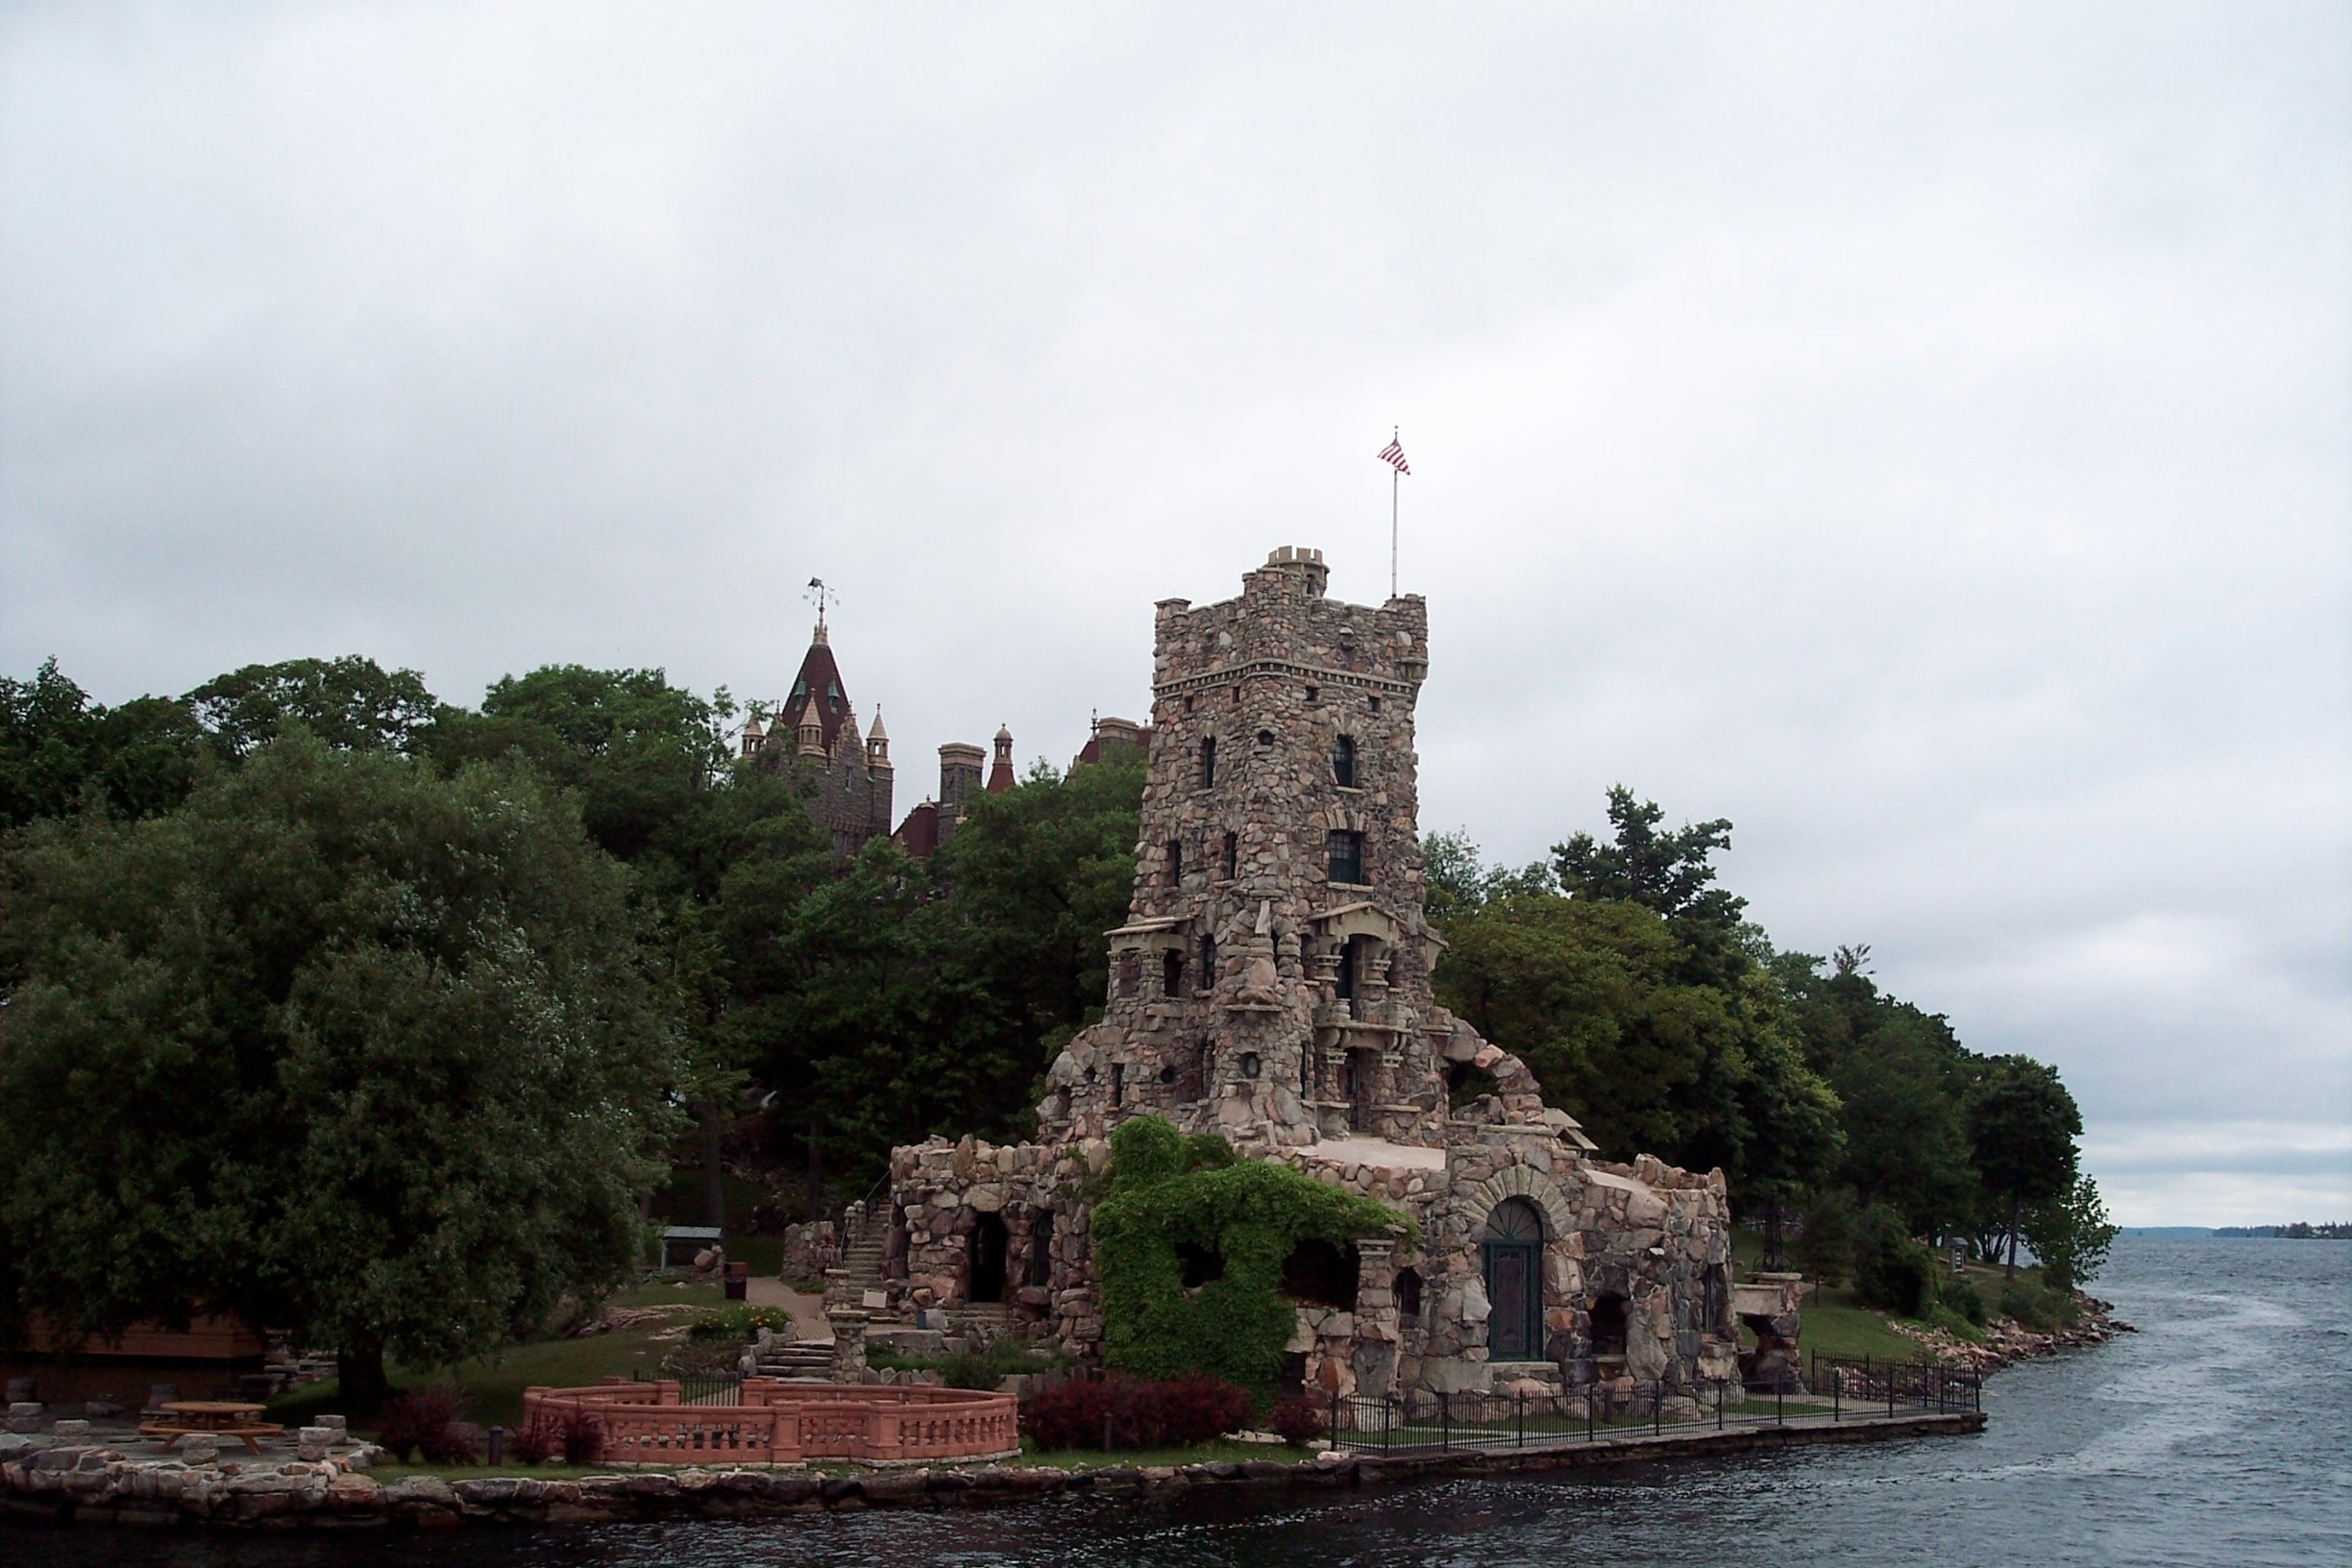 The tiny islands in the St Lawrence River are actually the tops of worn-down mountains. Do the cruise around all the quirky ways that people have added structures to them. And then you come across Boldt castle amongst all the islands! #water #boats #castles